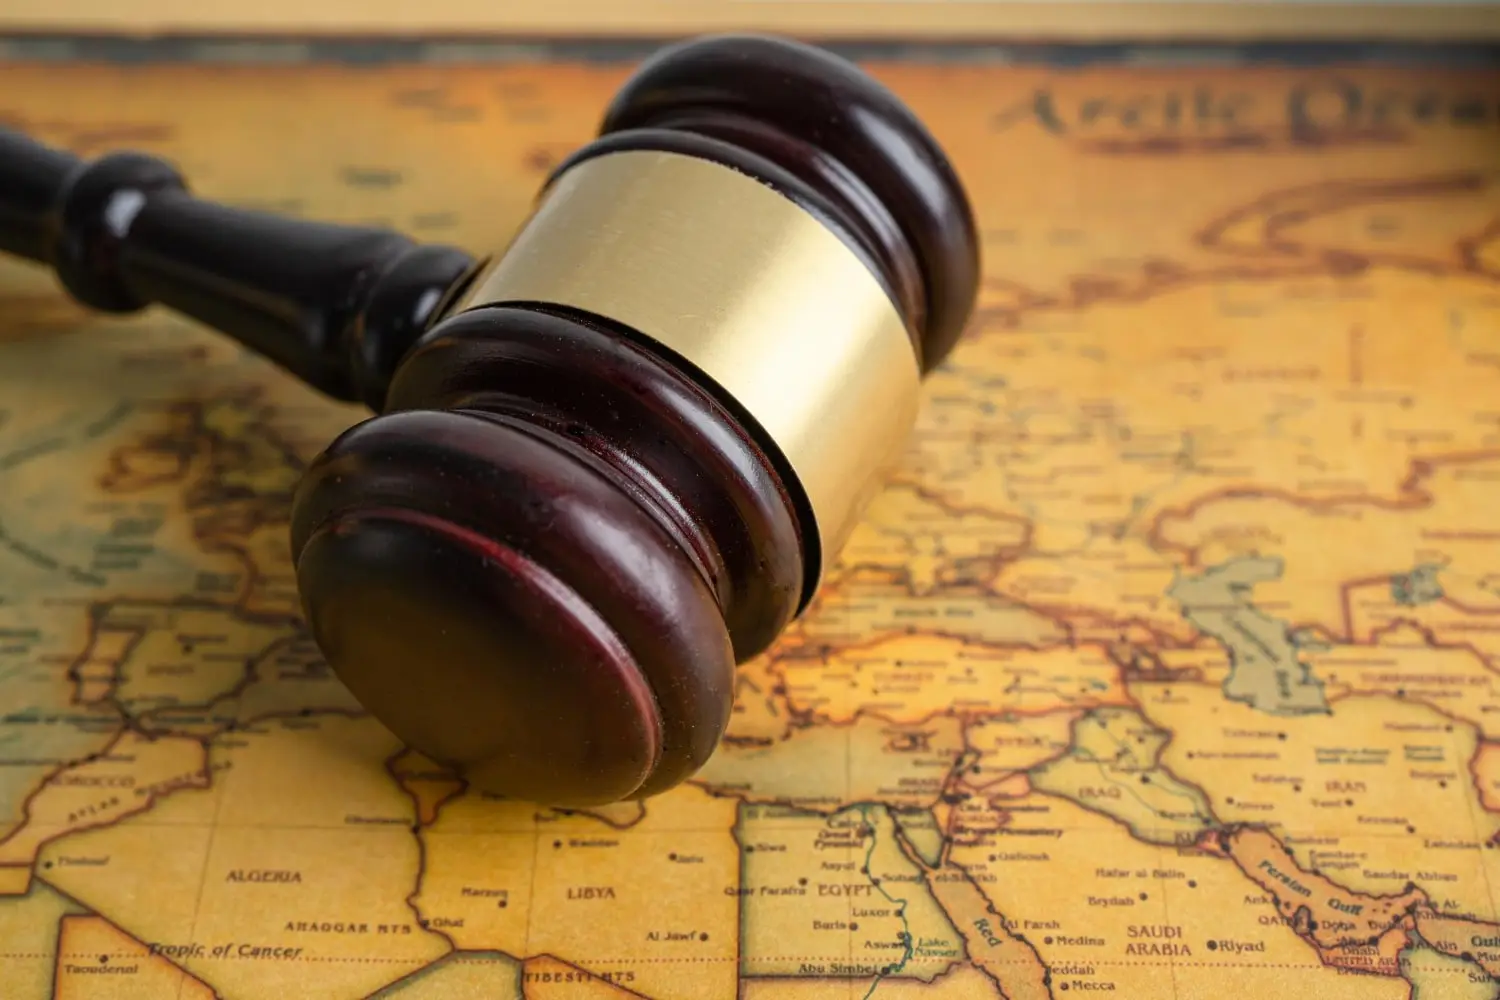 Judges gavel on a world map as a symbol of international comemrcial debt laws